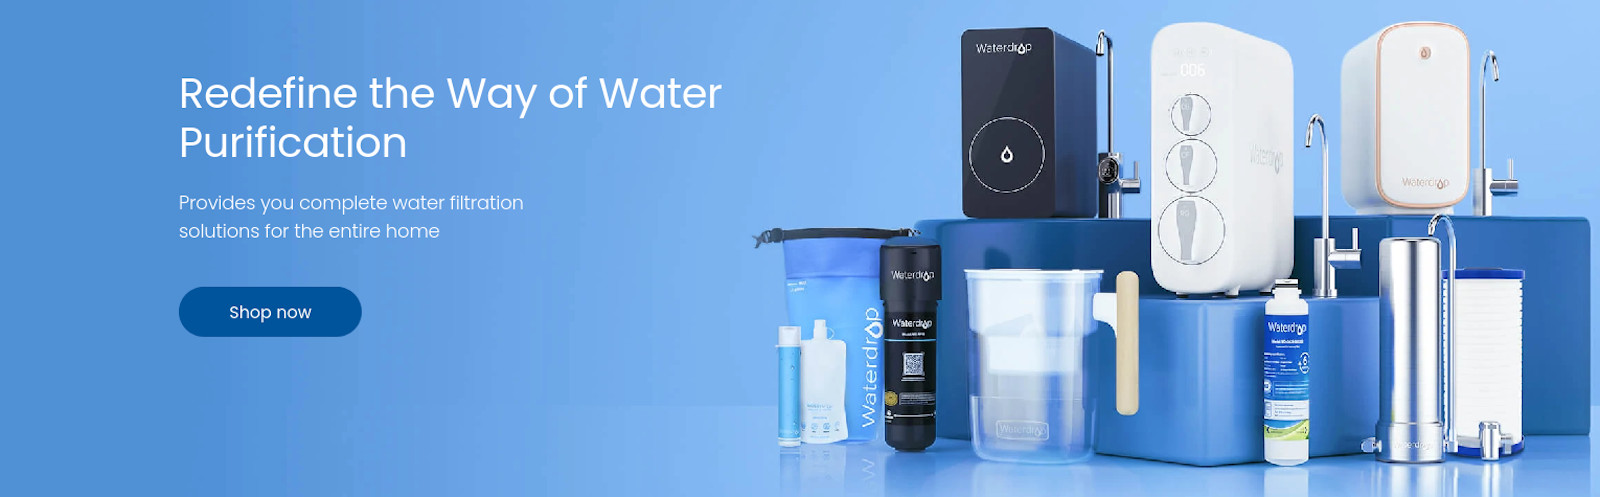 complete water filtration solutions uncostly